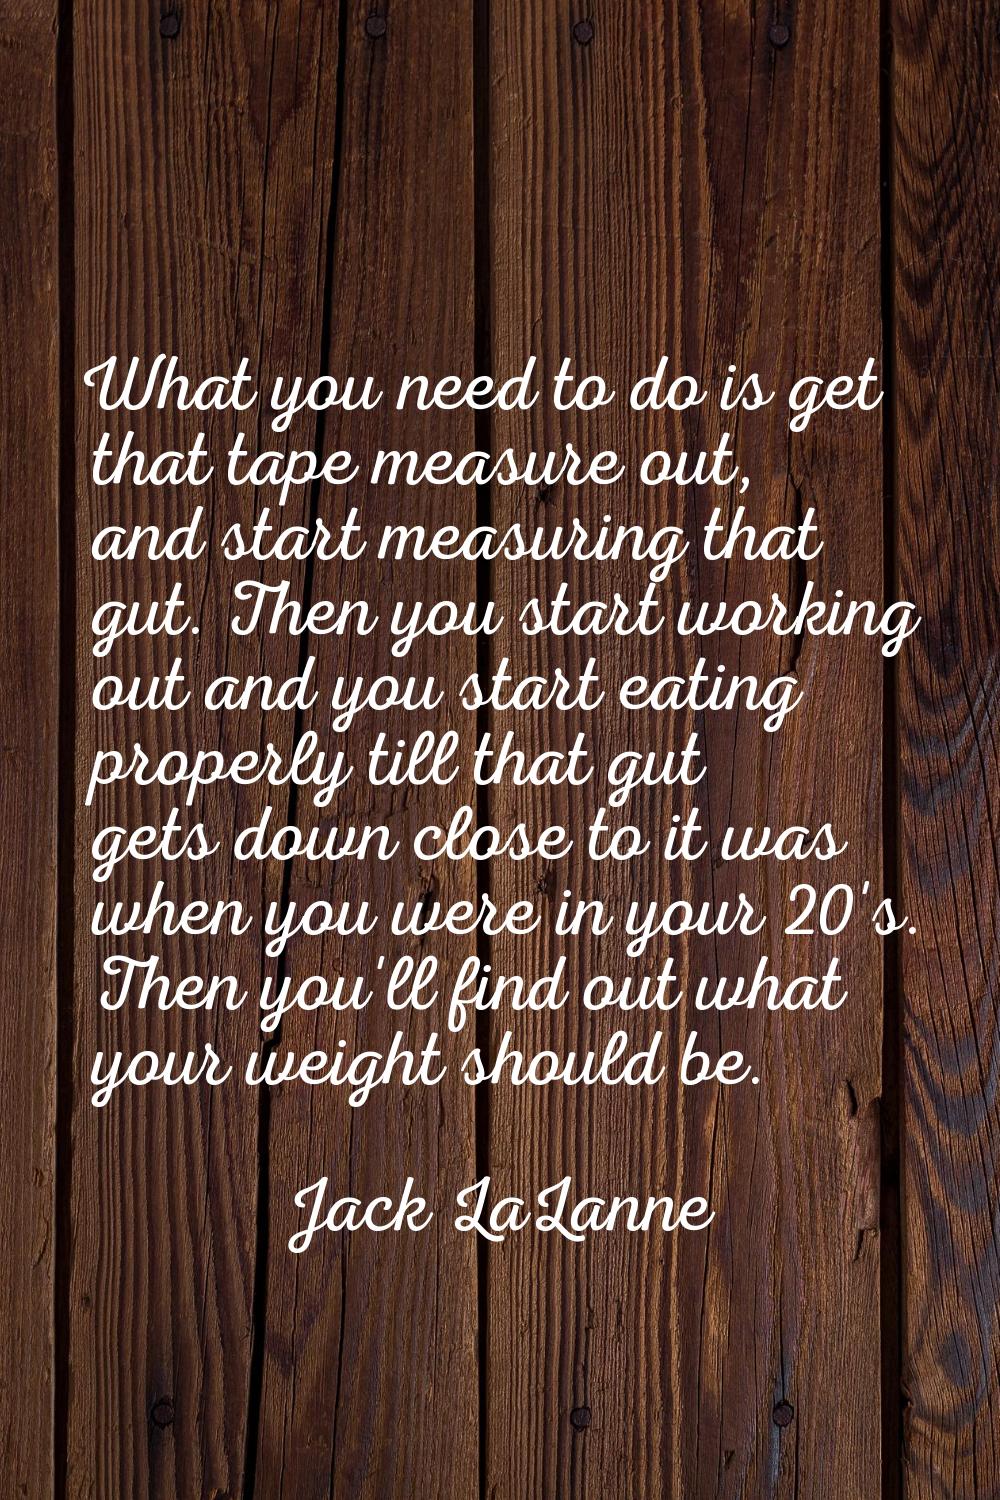 What you need to do is get that tape measure out, and start measuring that gut. Then you start work